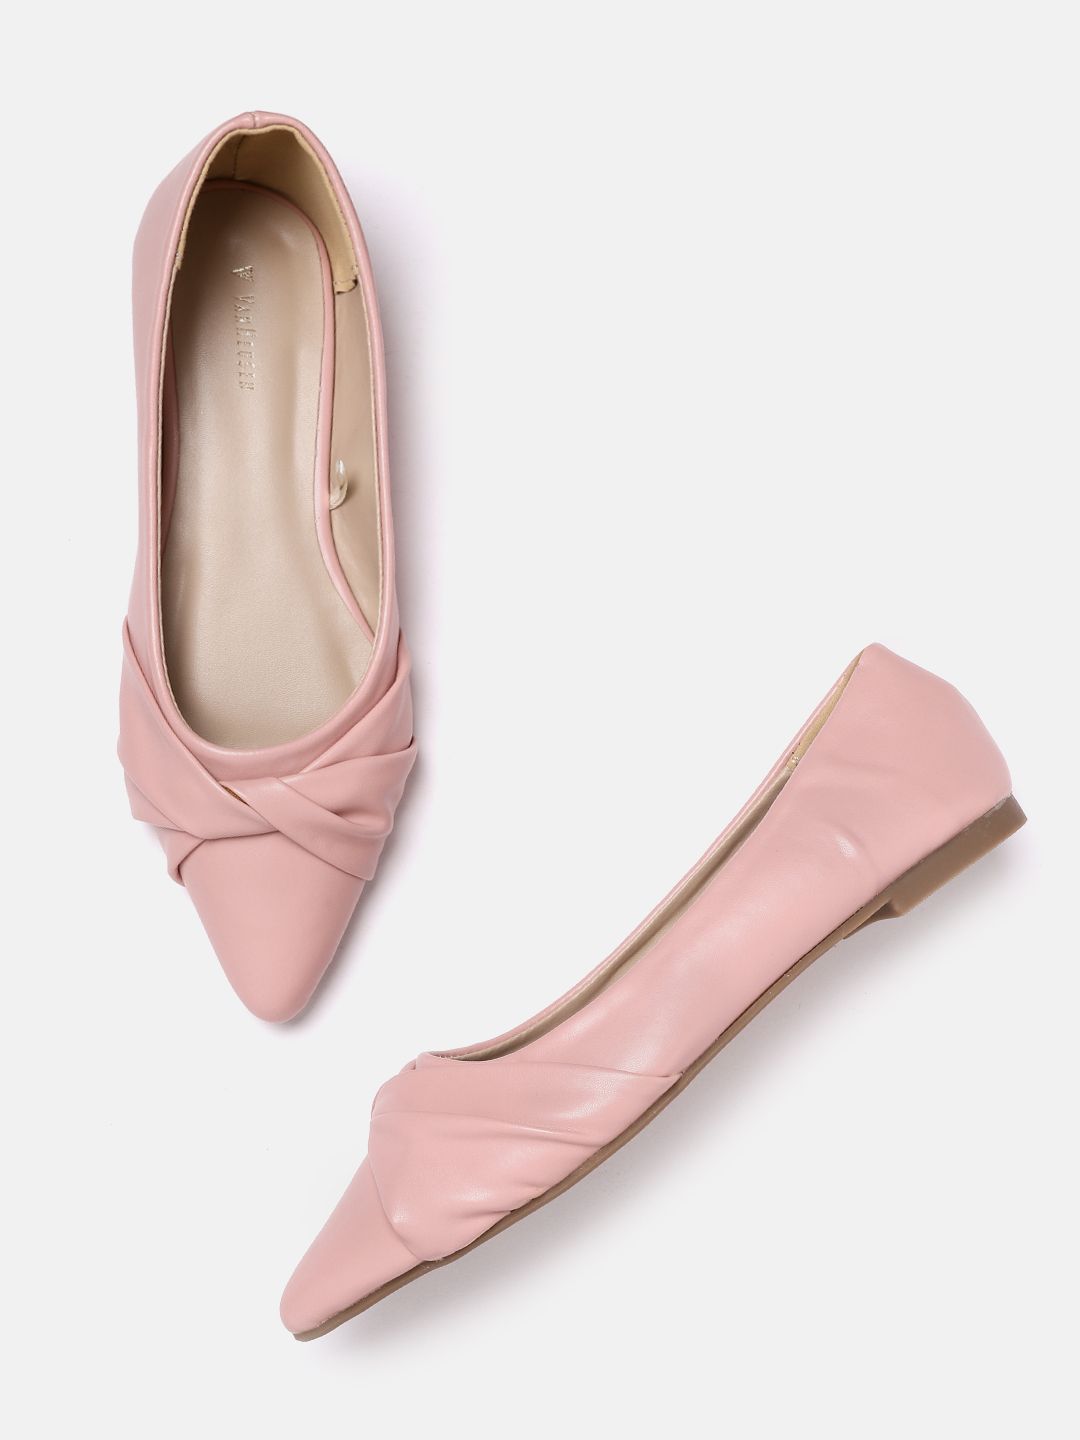 Van Heusen Woman Women Peach-Coloured Solid Ballerinas with Knot Detail Price in India